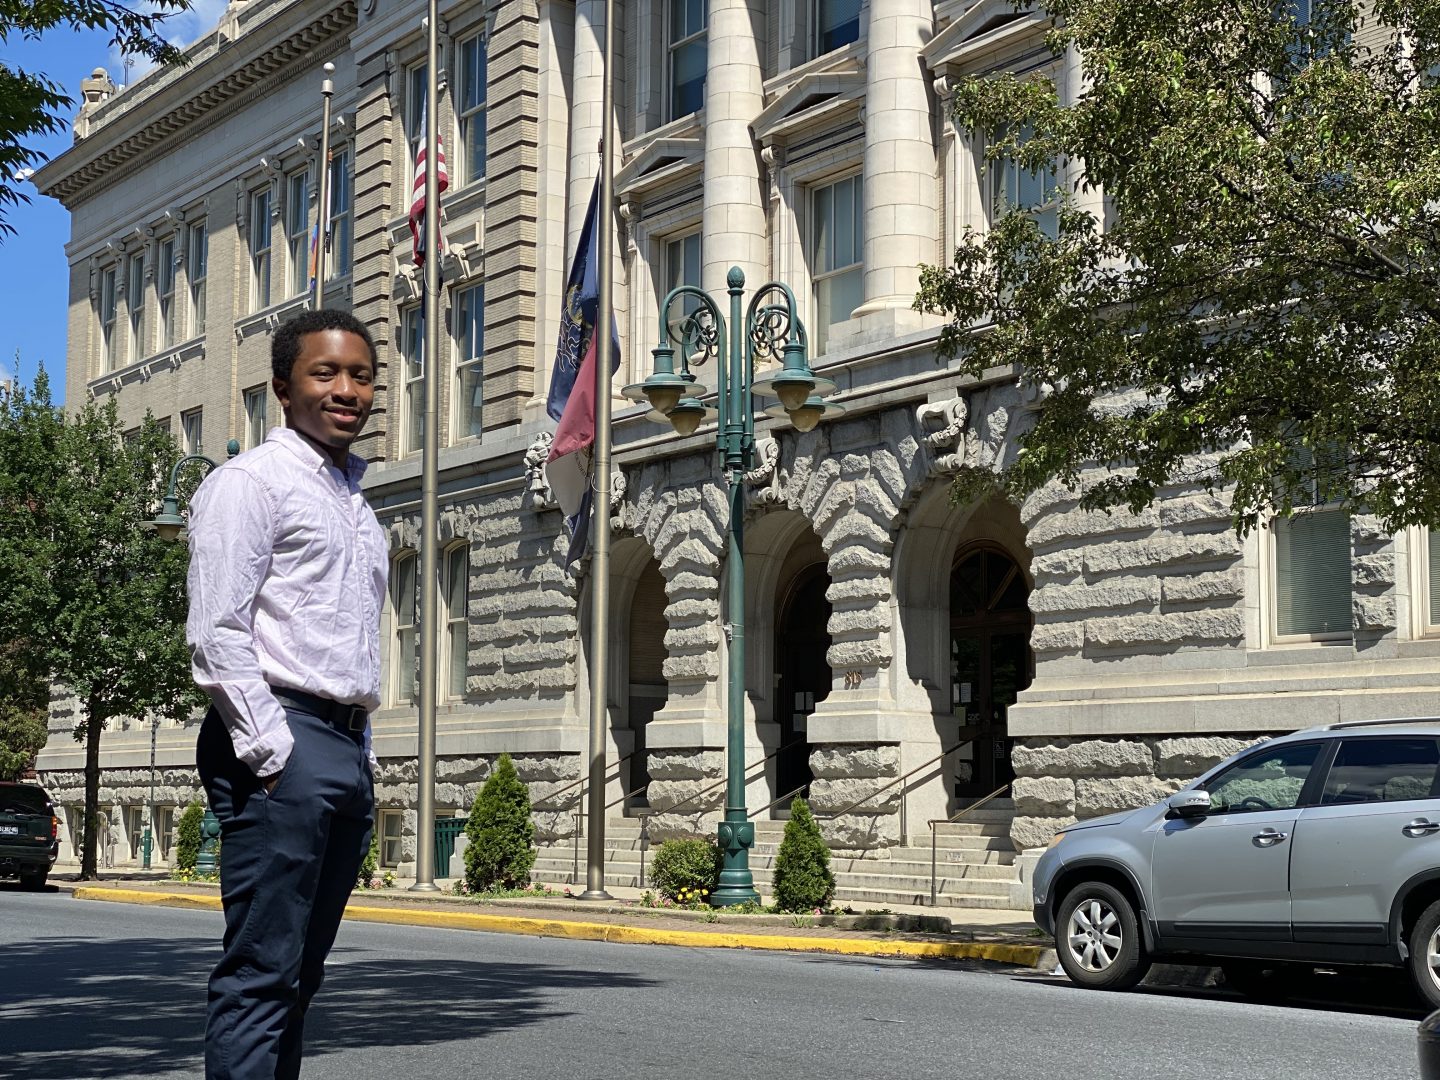 John Zabala, pictured in front of Reading City Hall, has been named as a community lead for the Reading Youth Commission. Too old to serve on the commission, Zabala is attracting applicants to the commission that has been dormant since its creation in 2017. (Anthony Orozco/PA Post) 